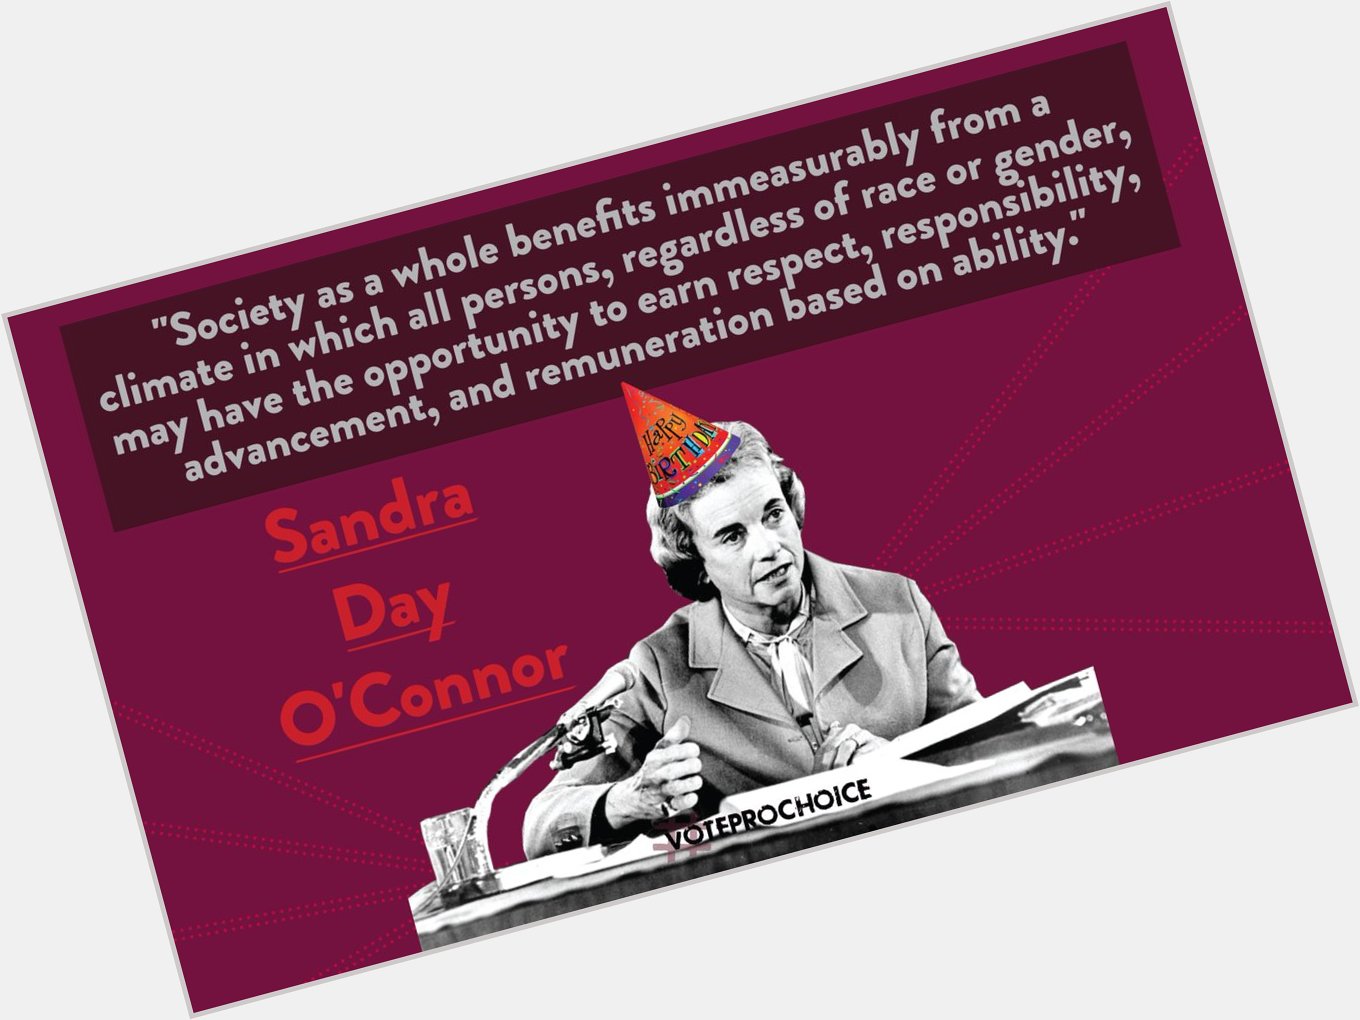 Happy birthday Sandra Day O\Connor, the first woman appointed to the US Supreme Court! 